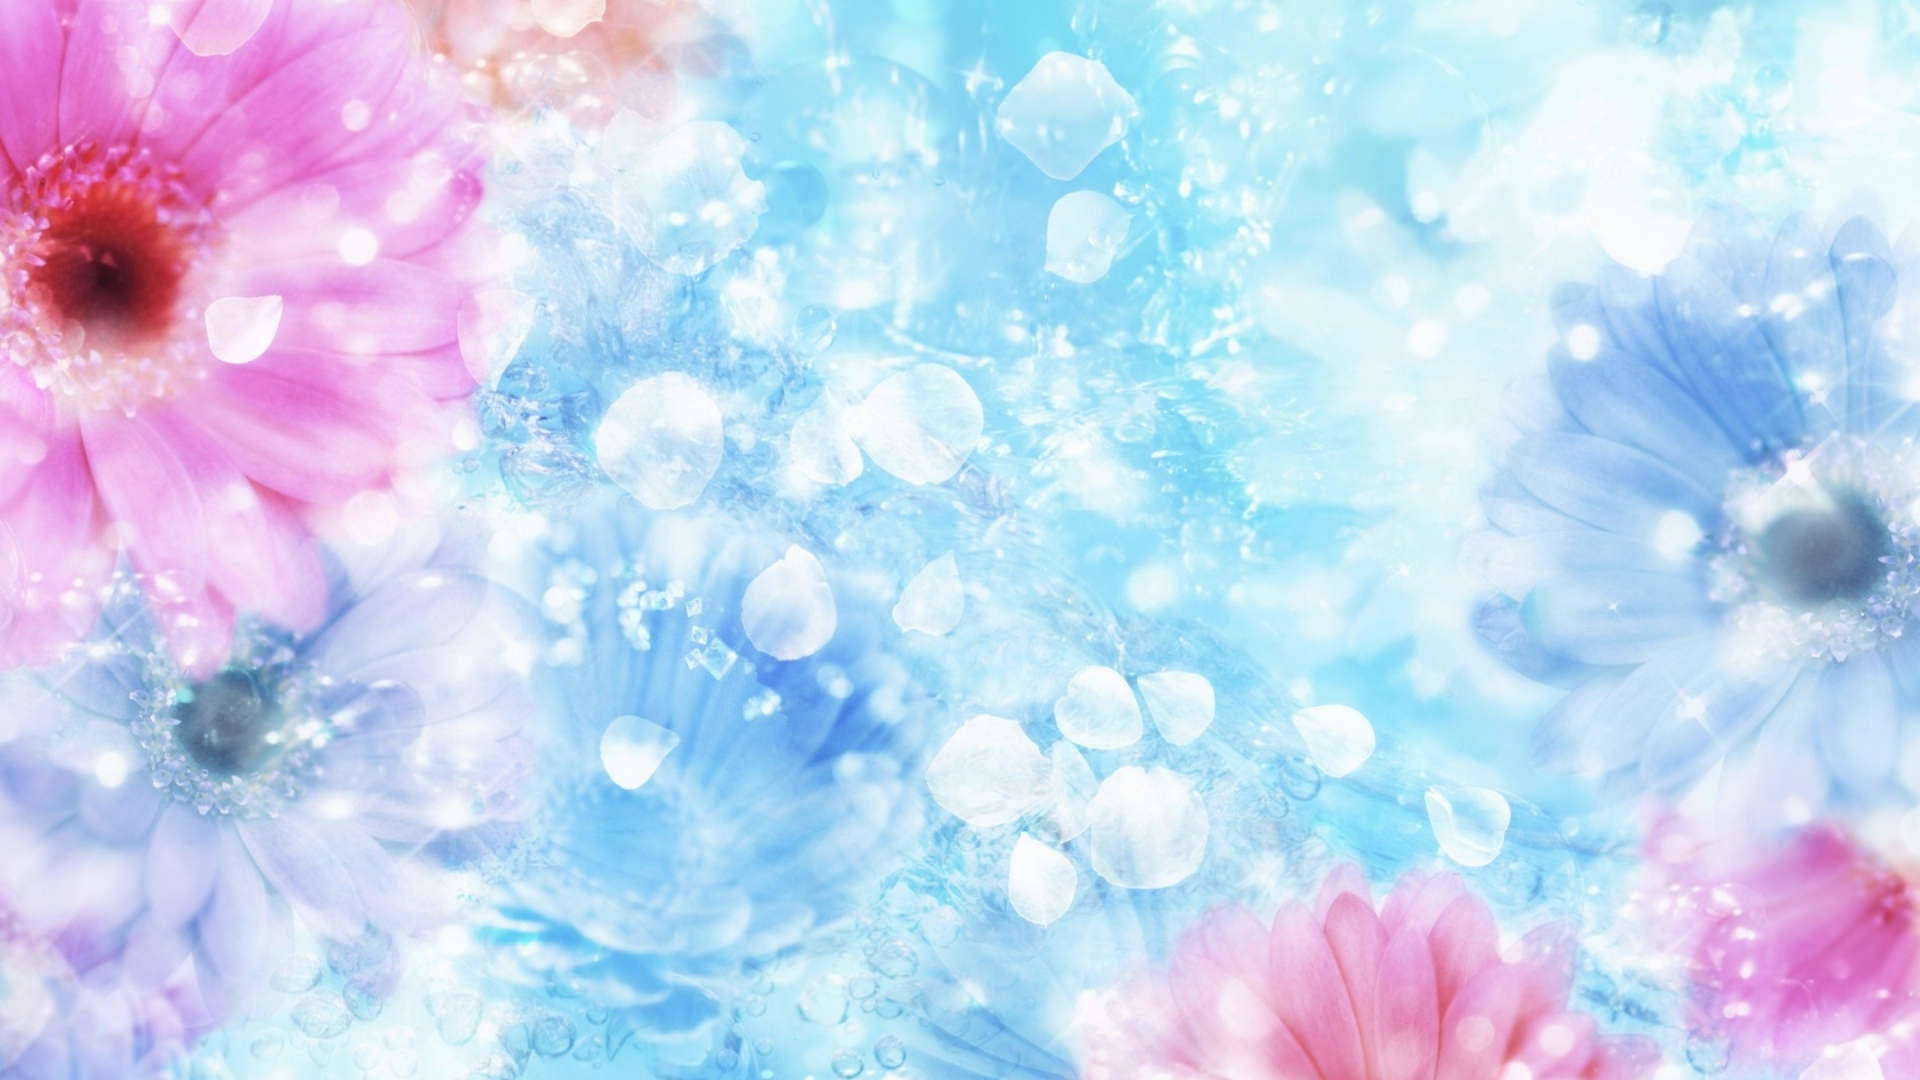 Flower And Water Bright Background Wallpaper